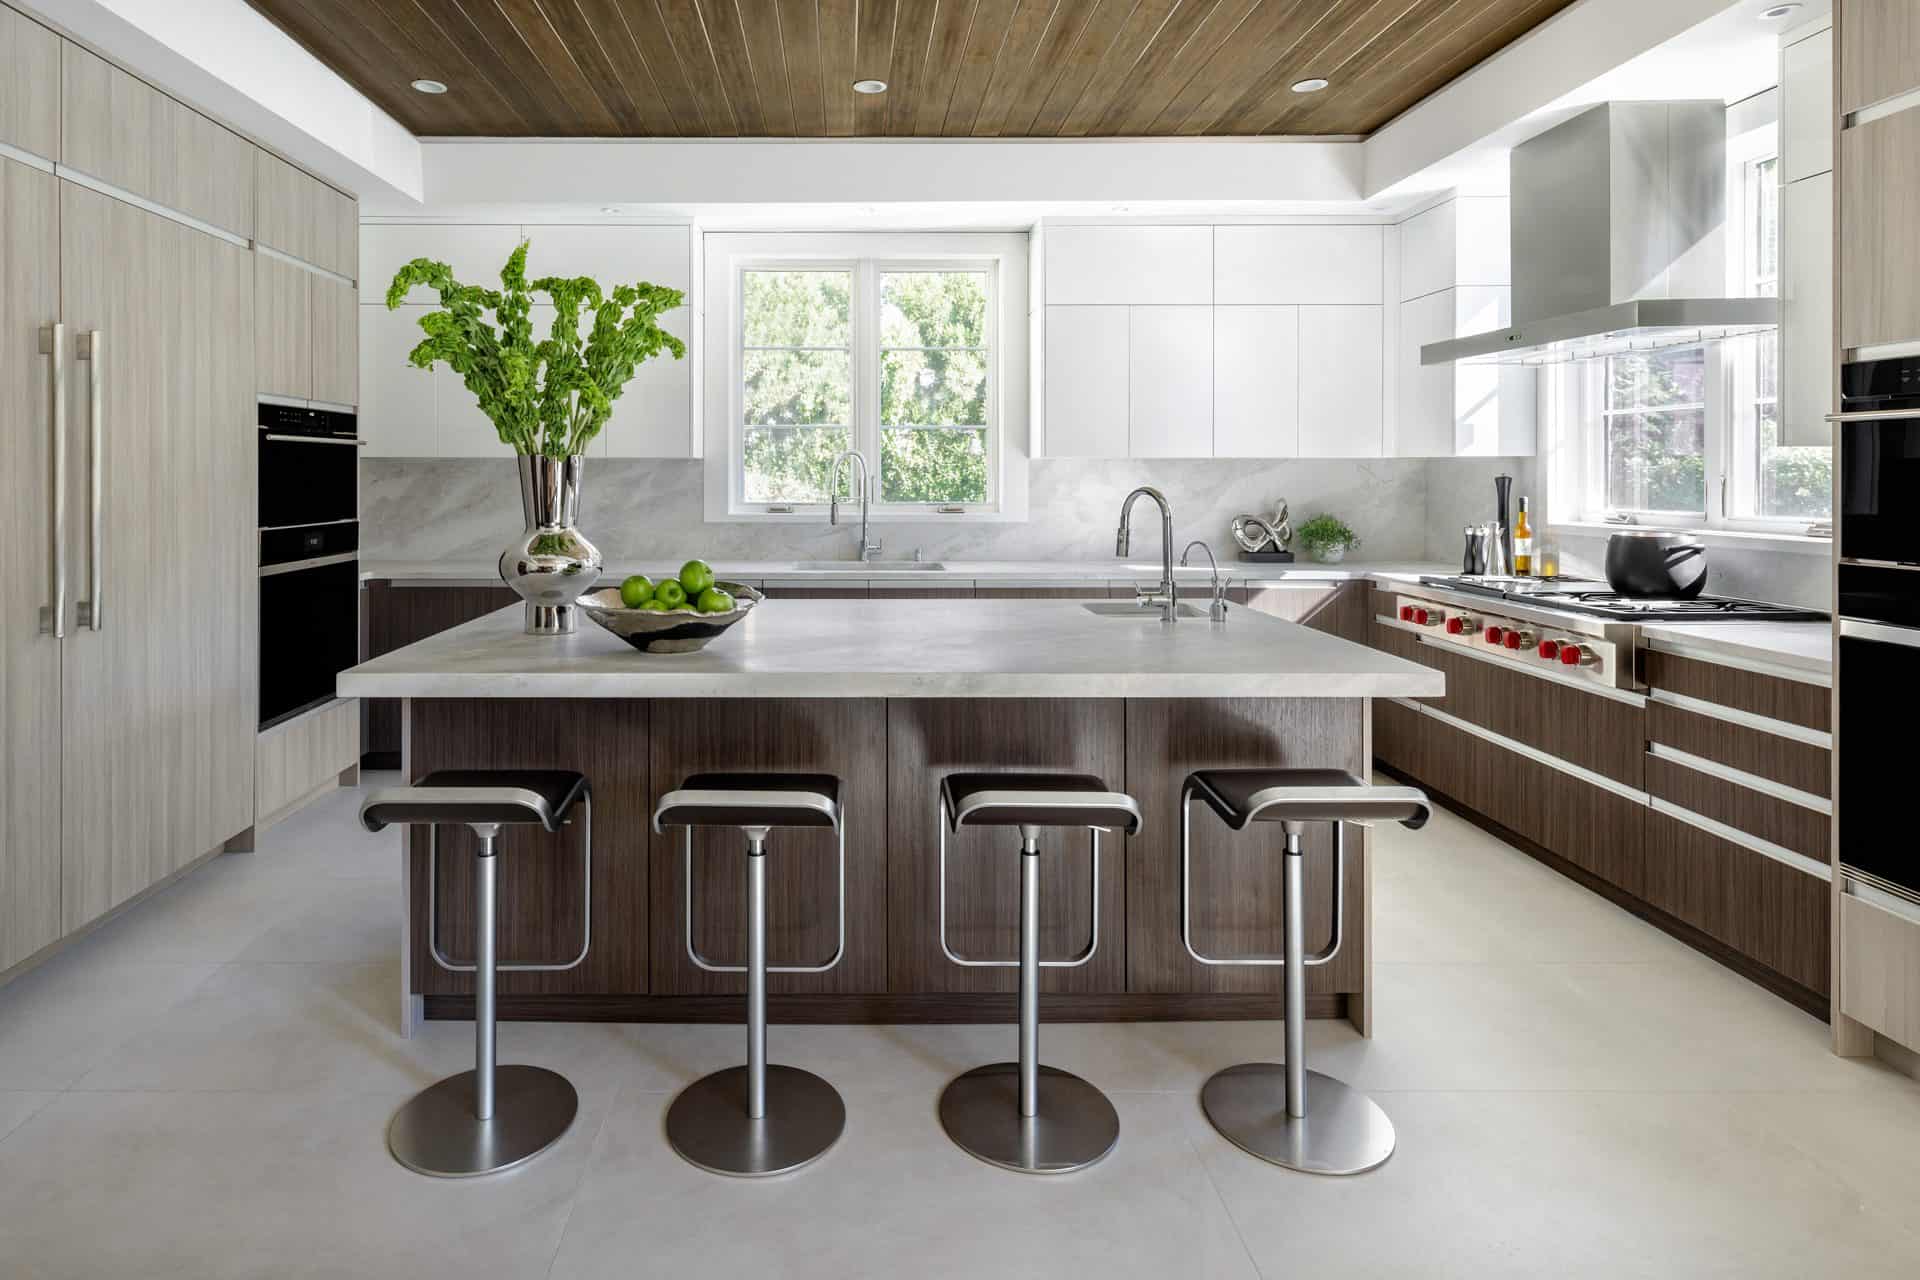 Minimalistic kitchen allows artwork to take center stage. Artcraft cabinets feature slab doors and integrated hardware.